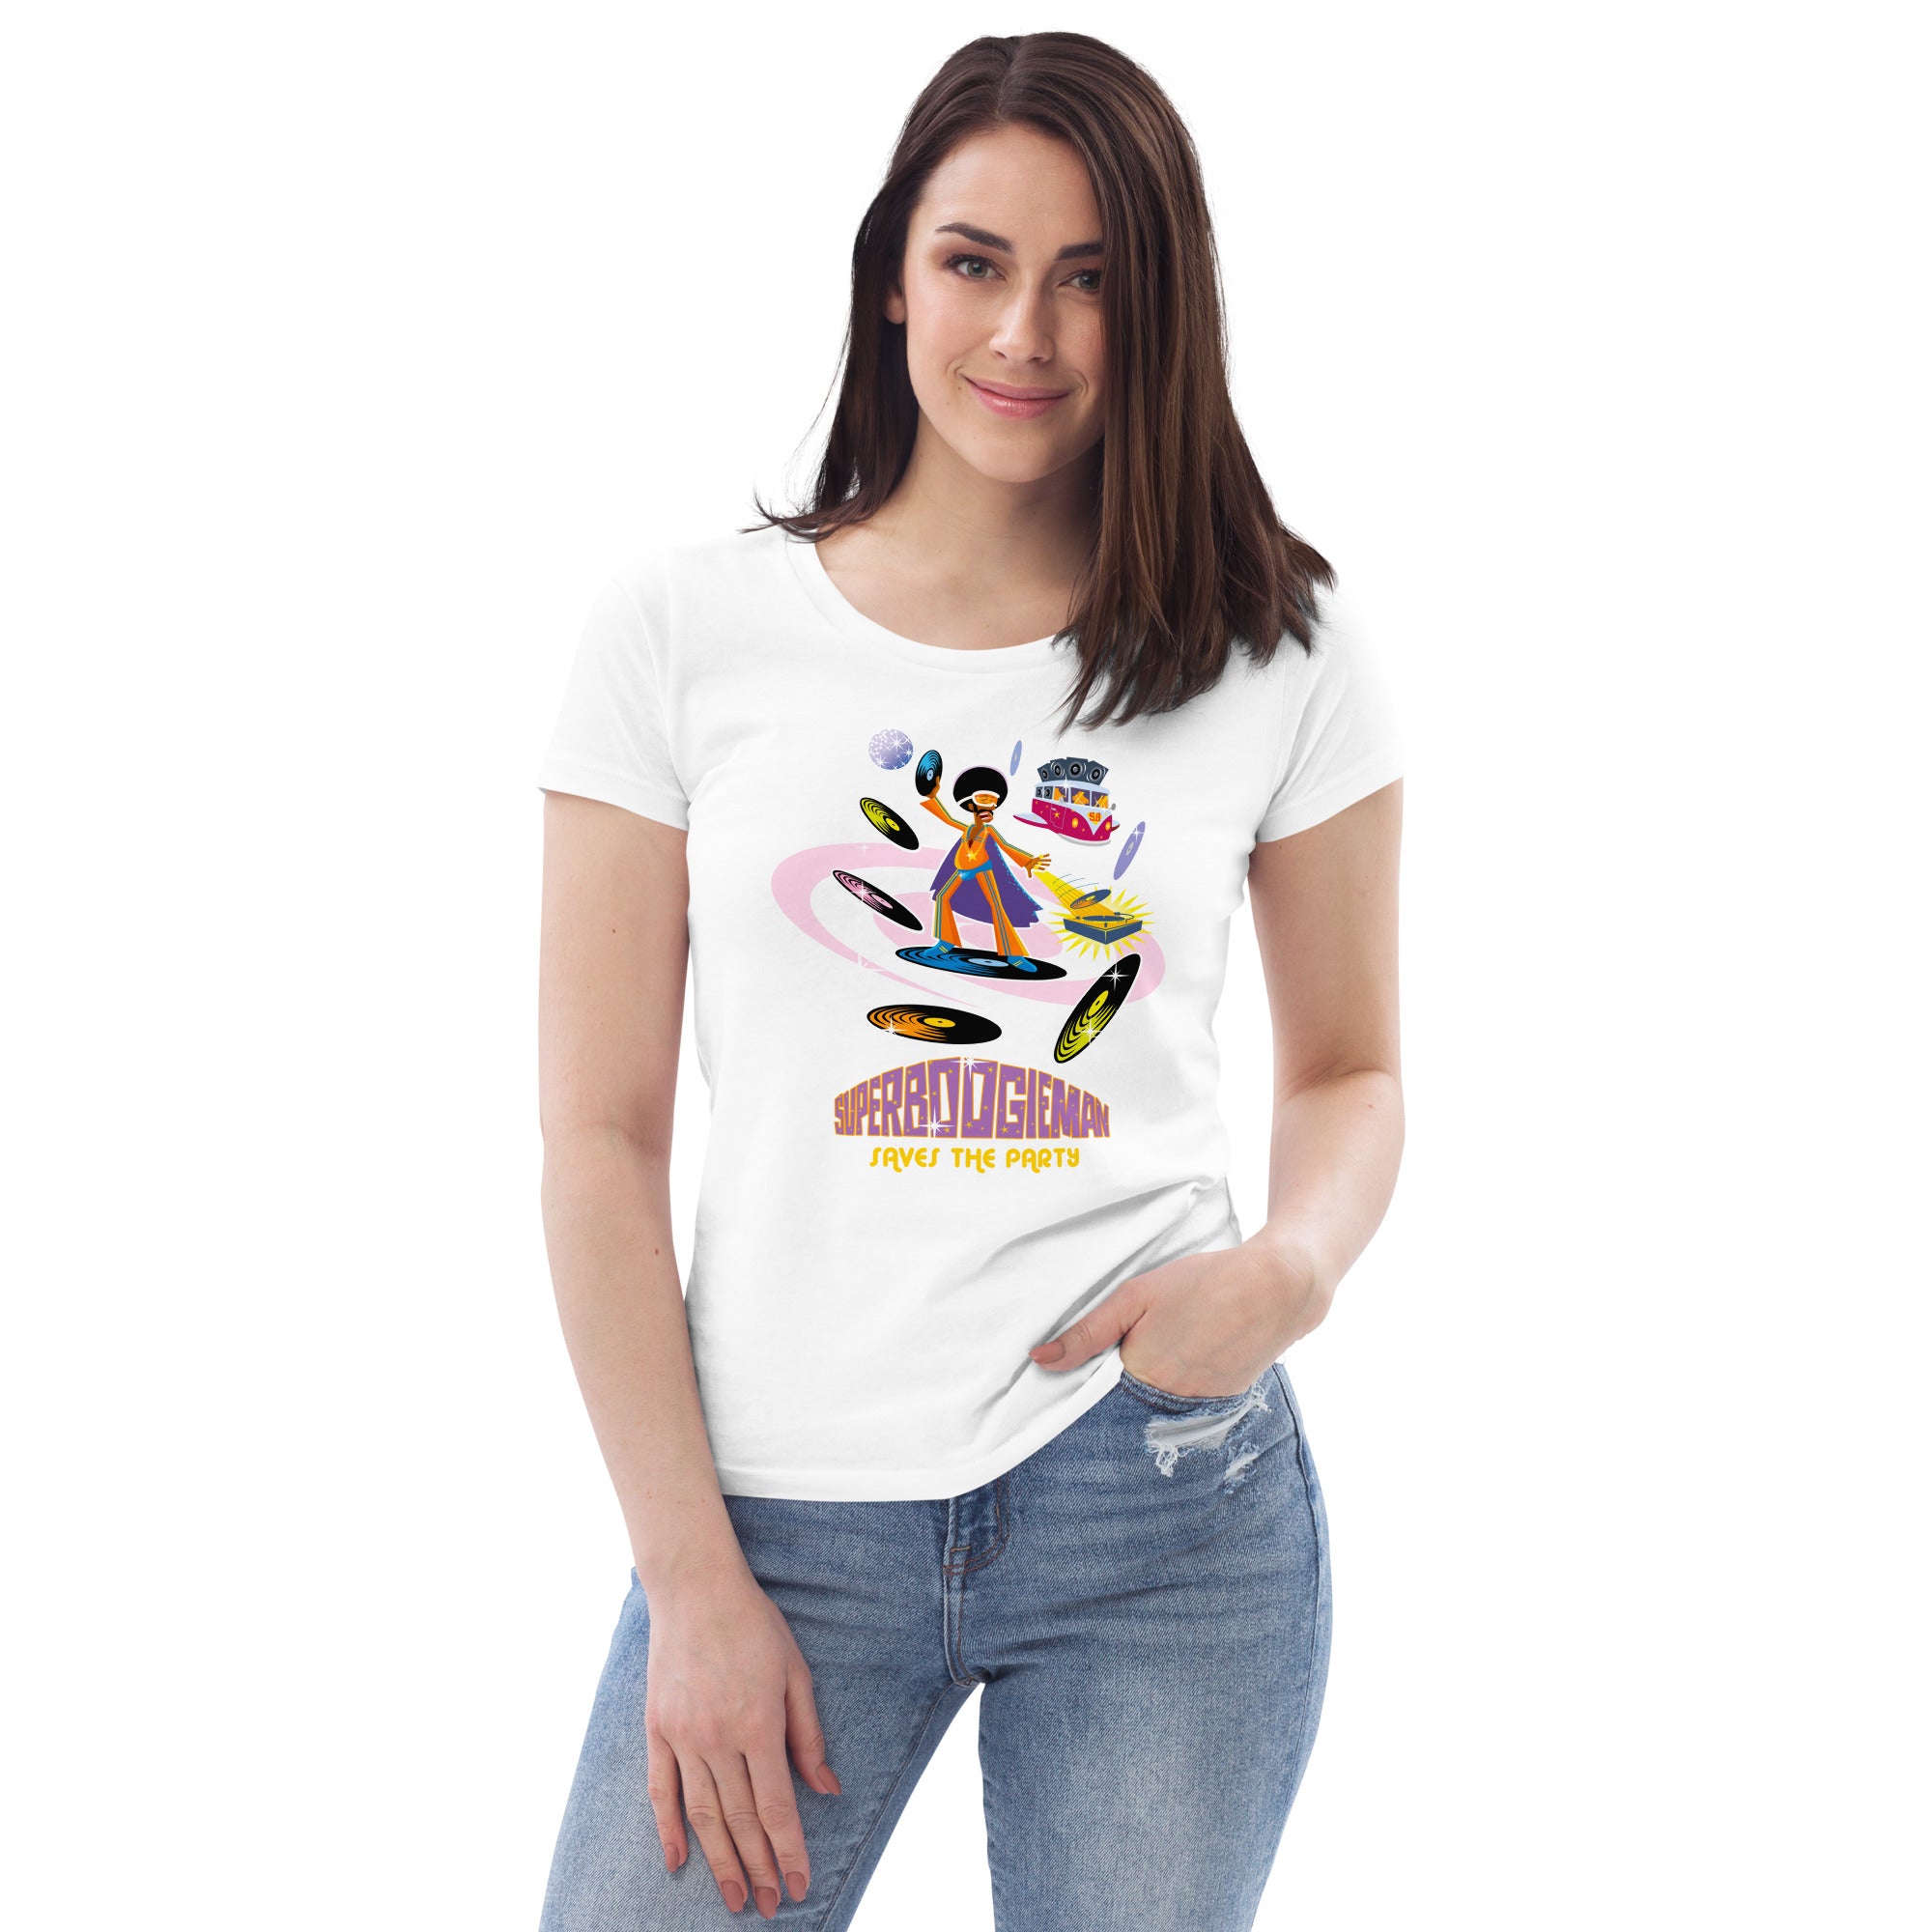 Women's fitted eco tee Superboogieman saves the party